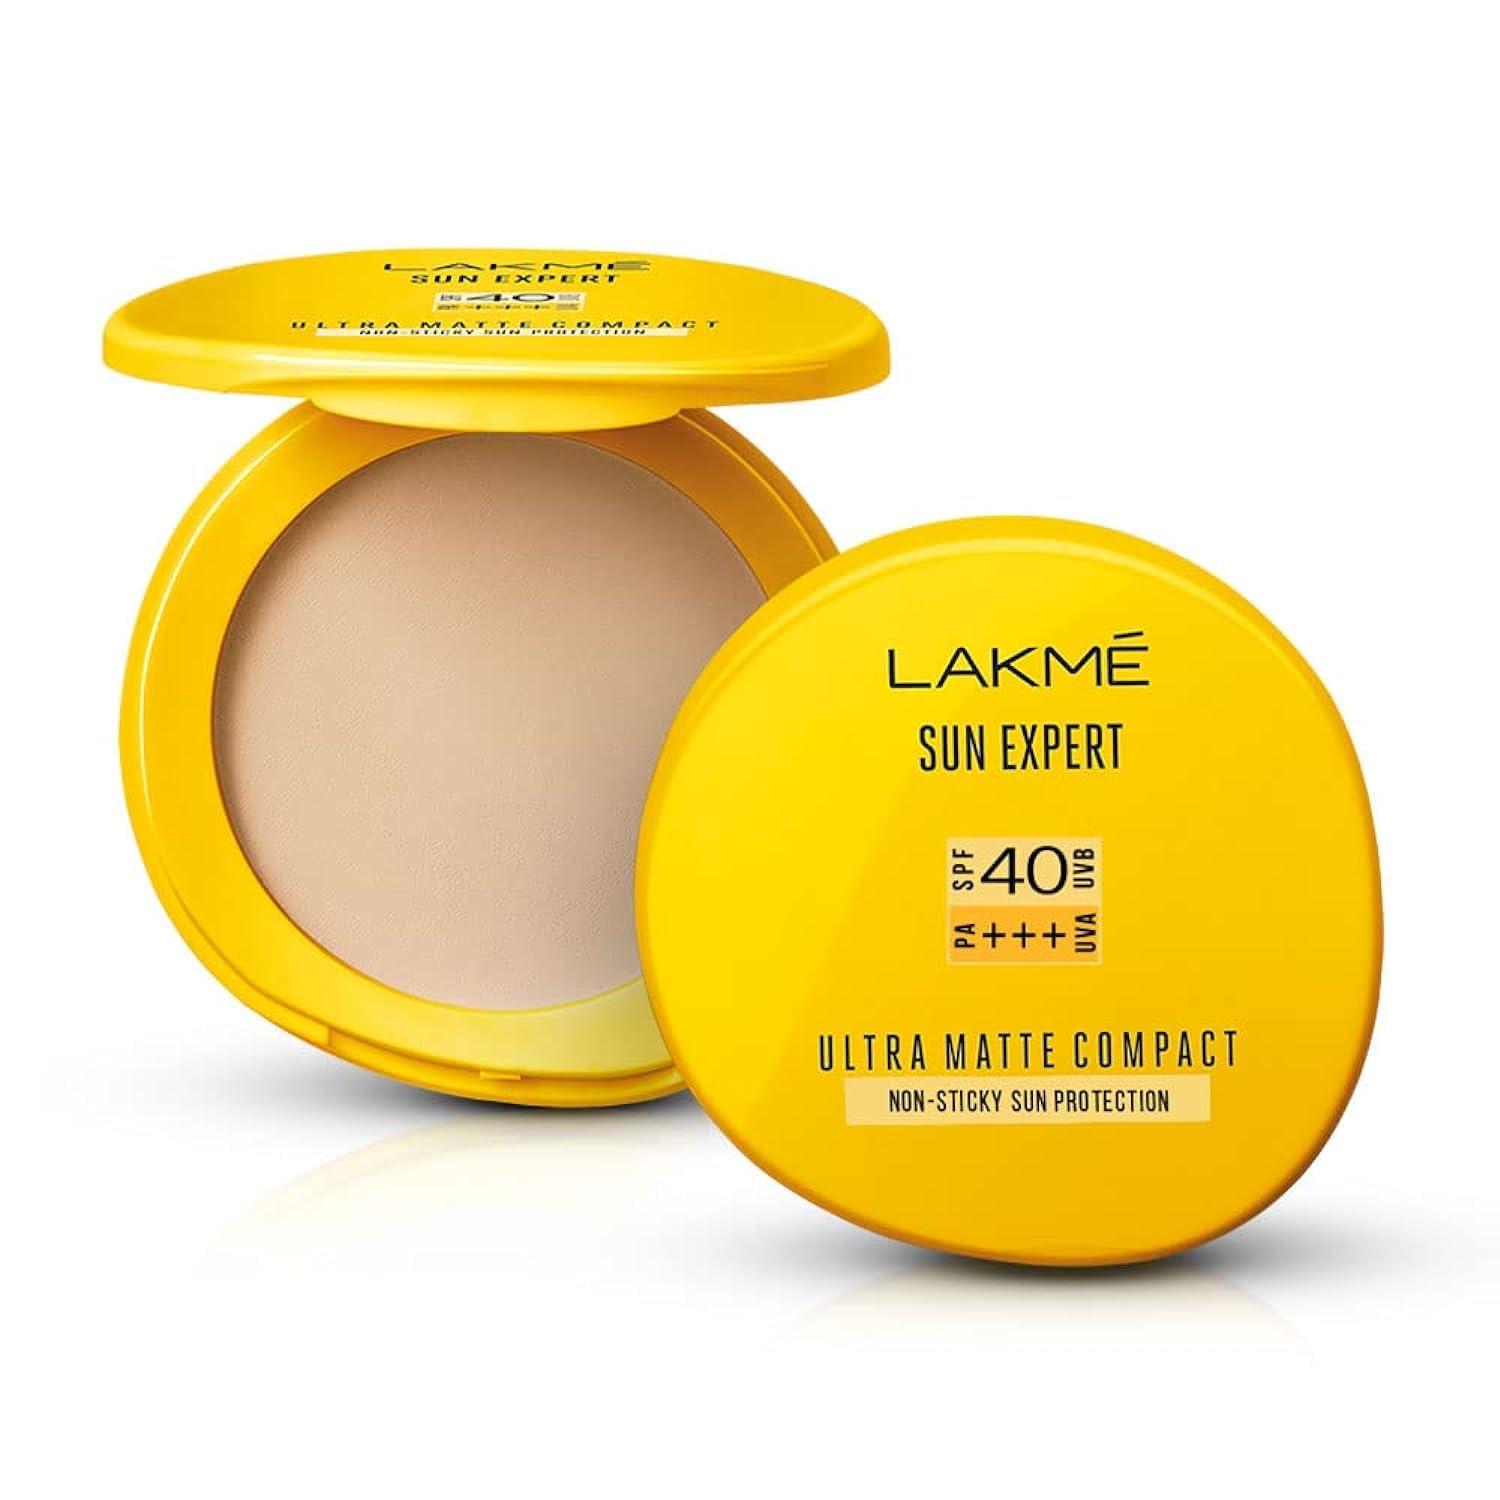 lakme sun expert ultra matte spf 40 pa+++ compact, non greasy non sticky, for indian skin, gives even-tone complexion, 7 g